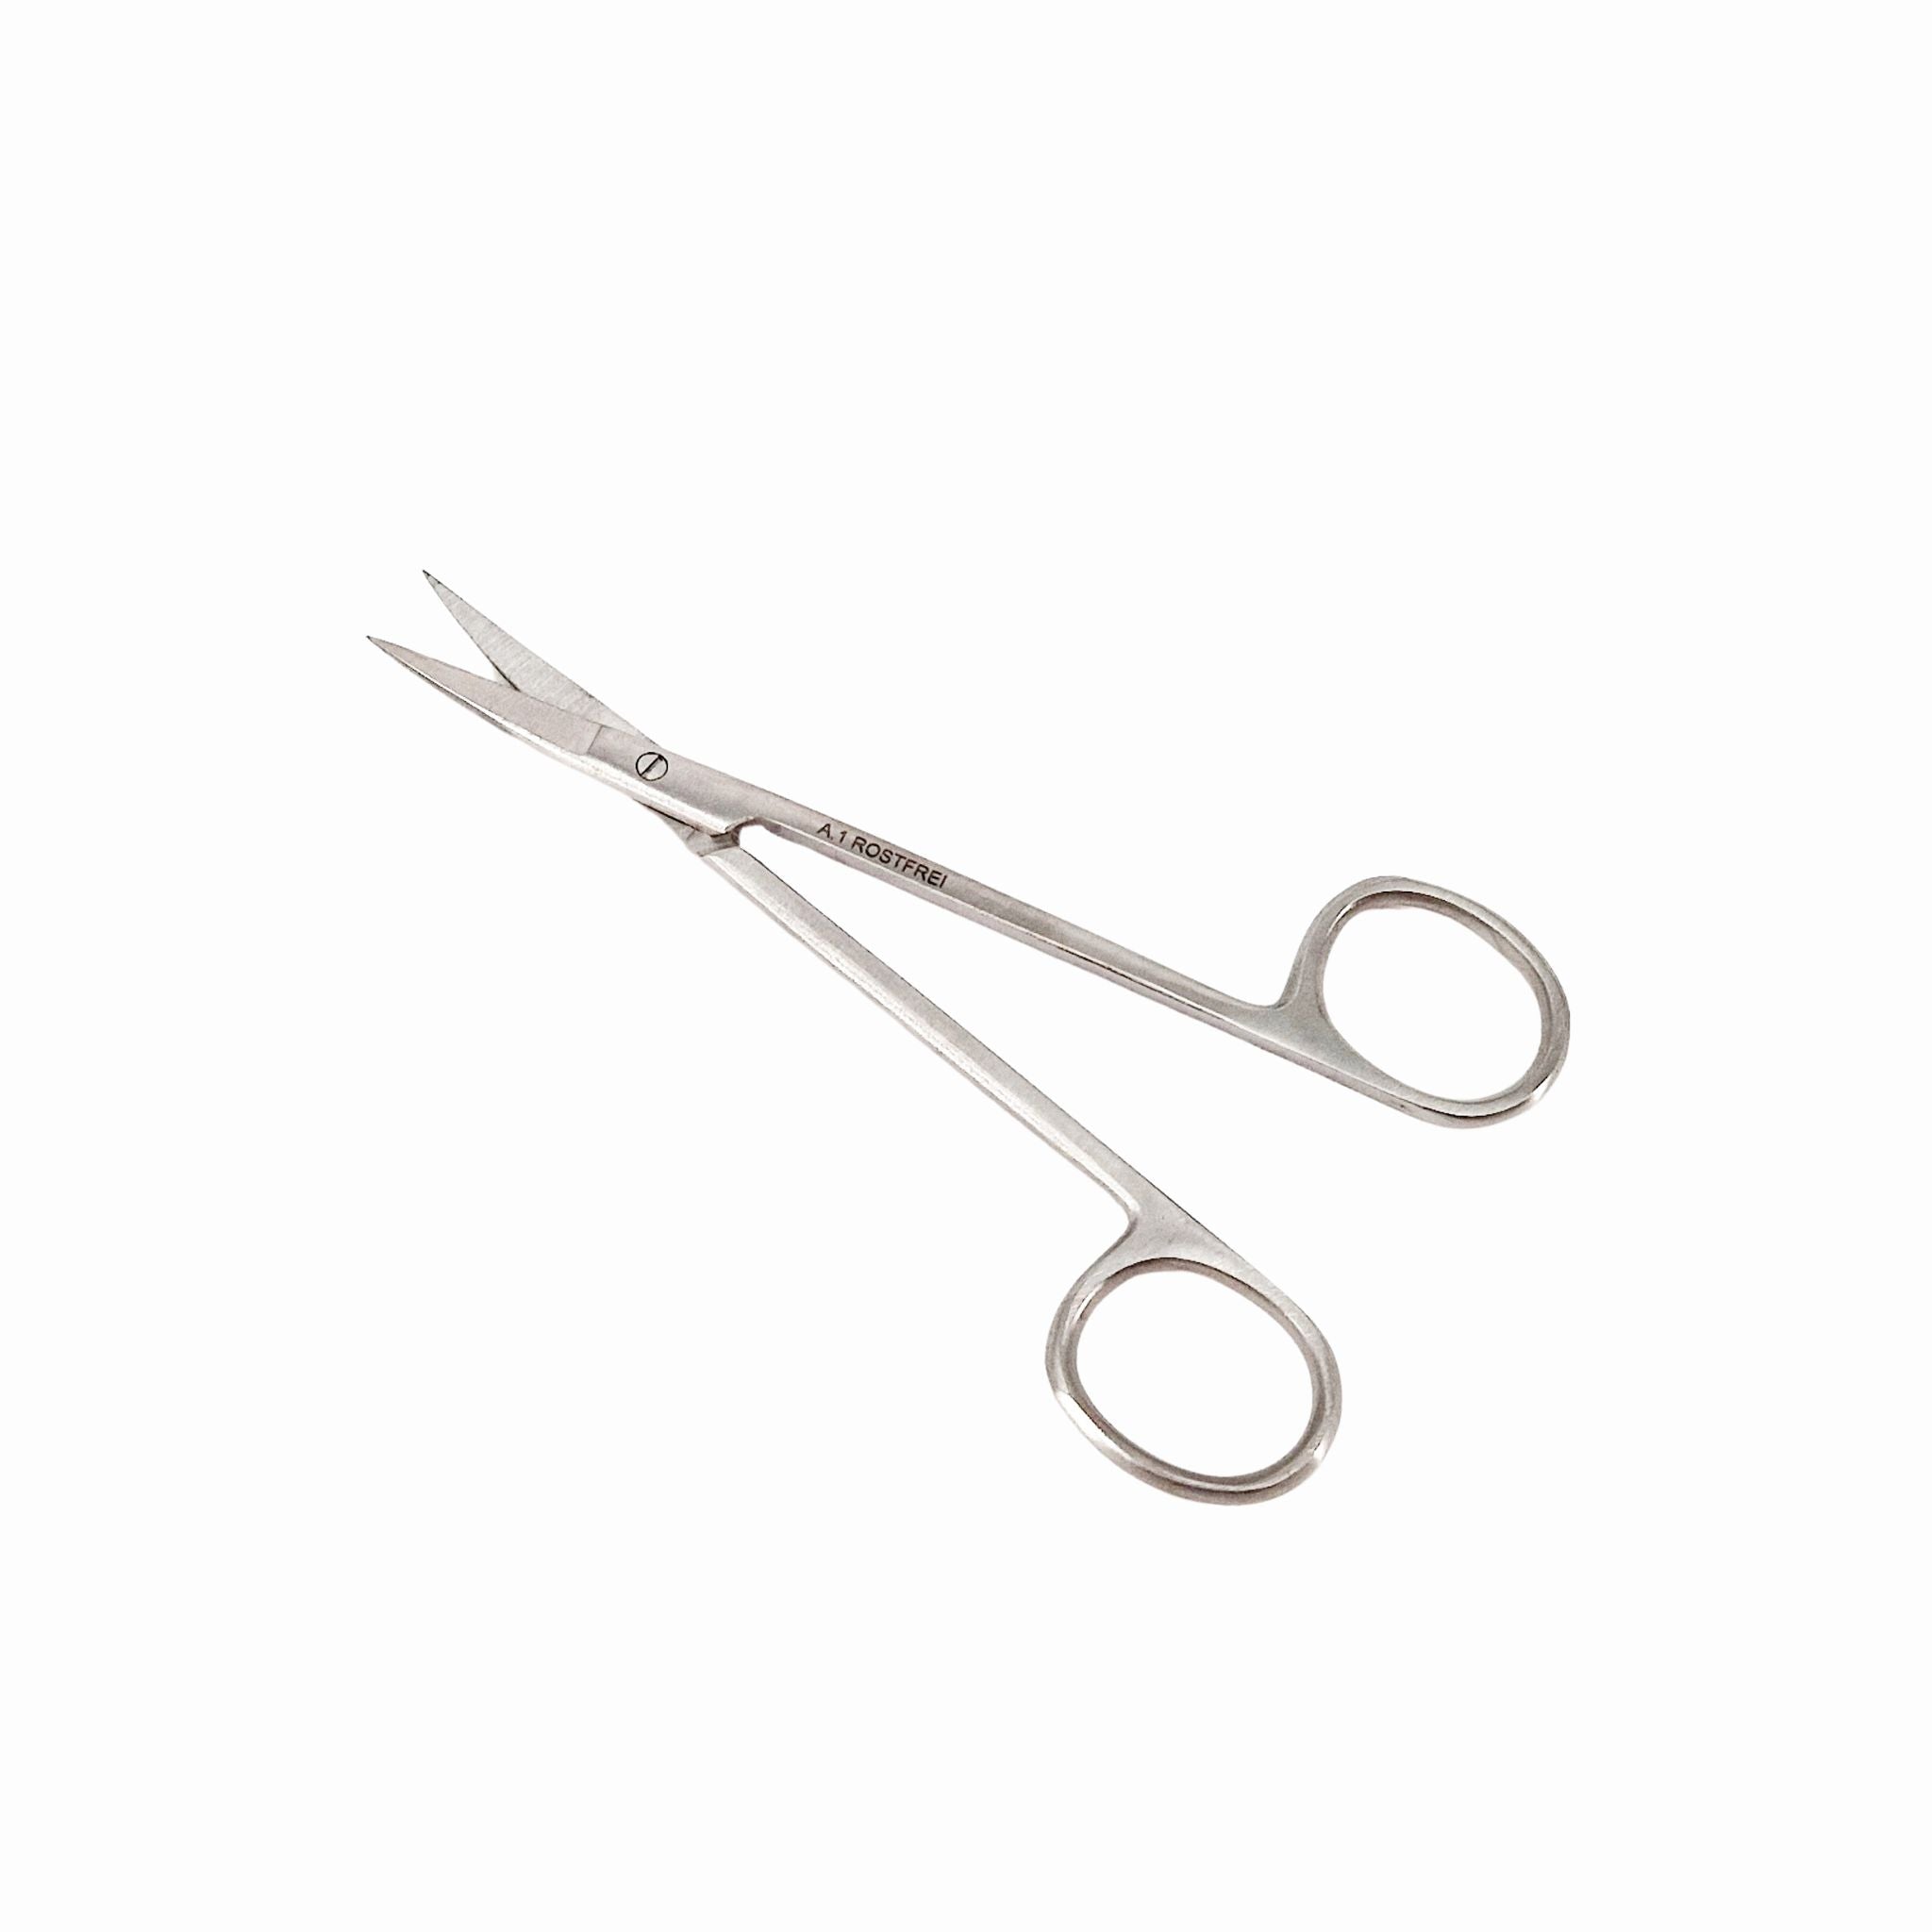 Lavabis skin and thread scissors curved stainless steel